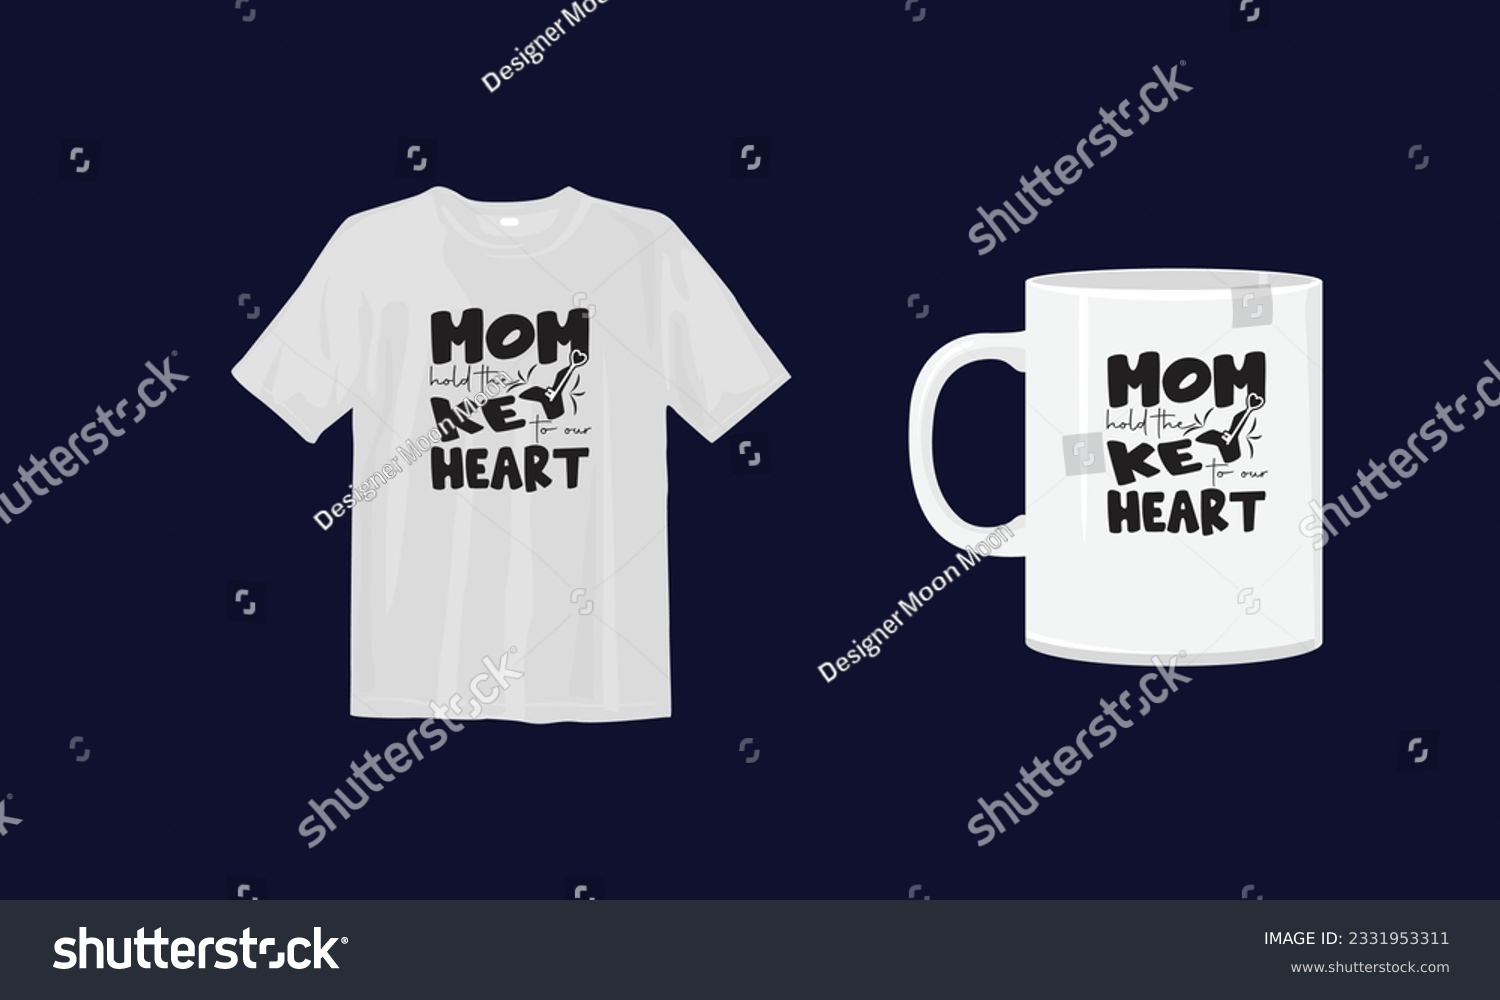 SVG of mom hold the key to our heart typography t shirt , typography t shirt design , t shirt design , t shirt , SVG ,SVG design  svg